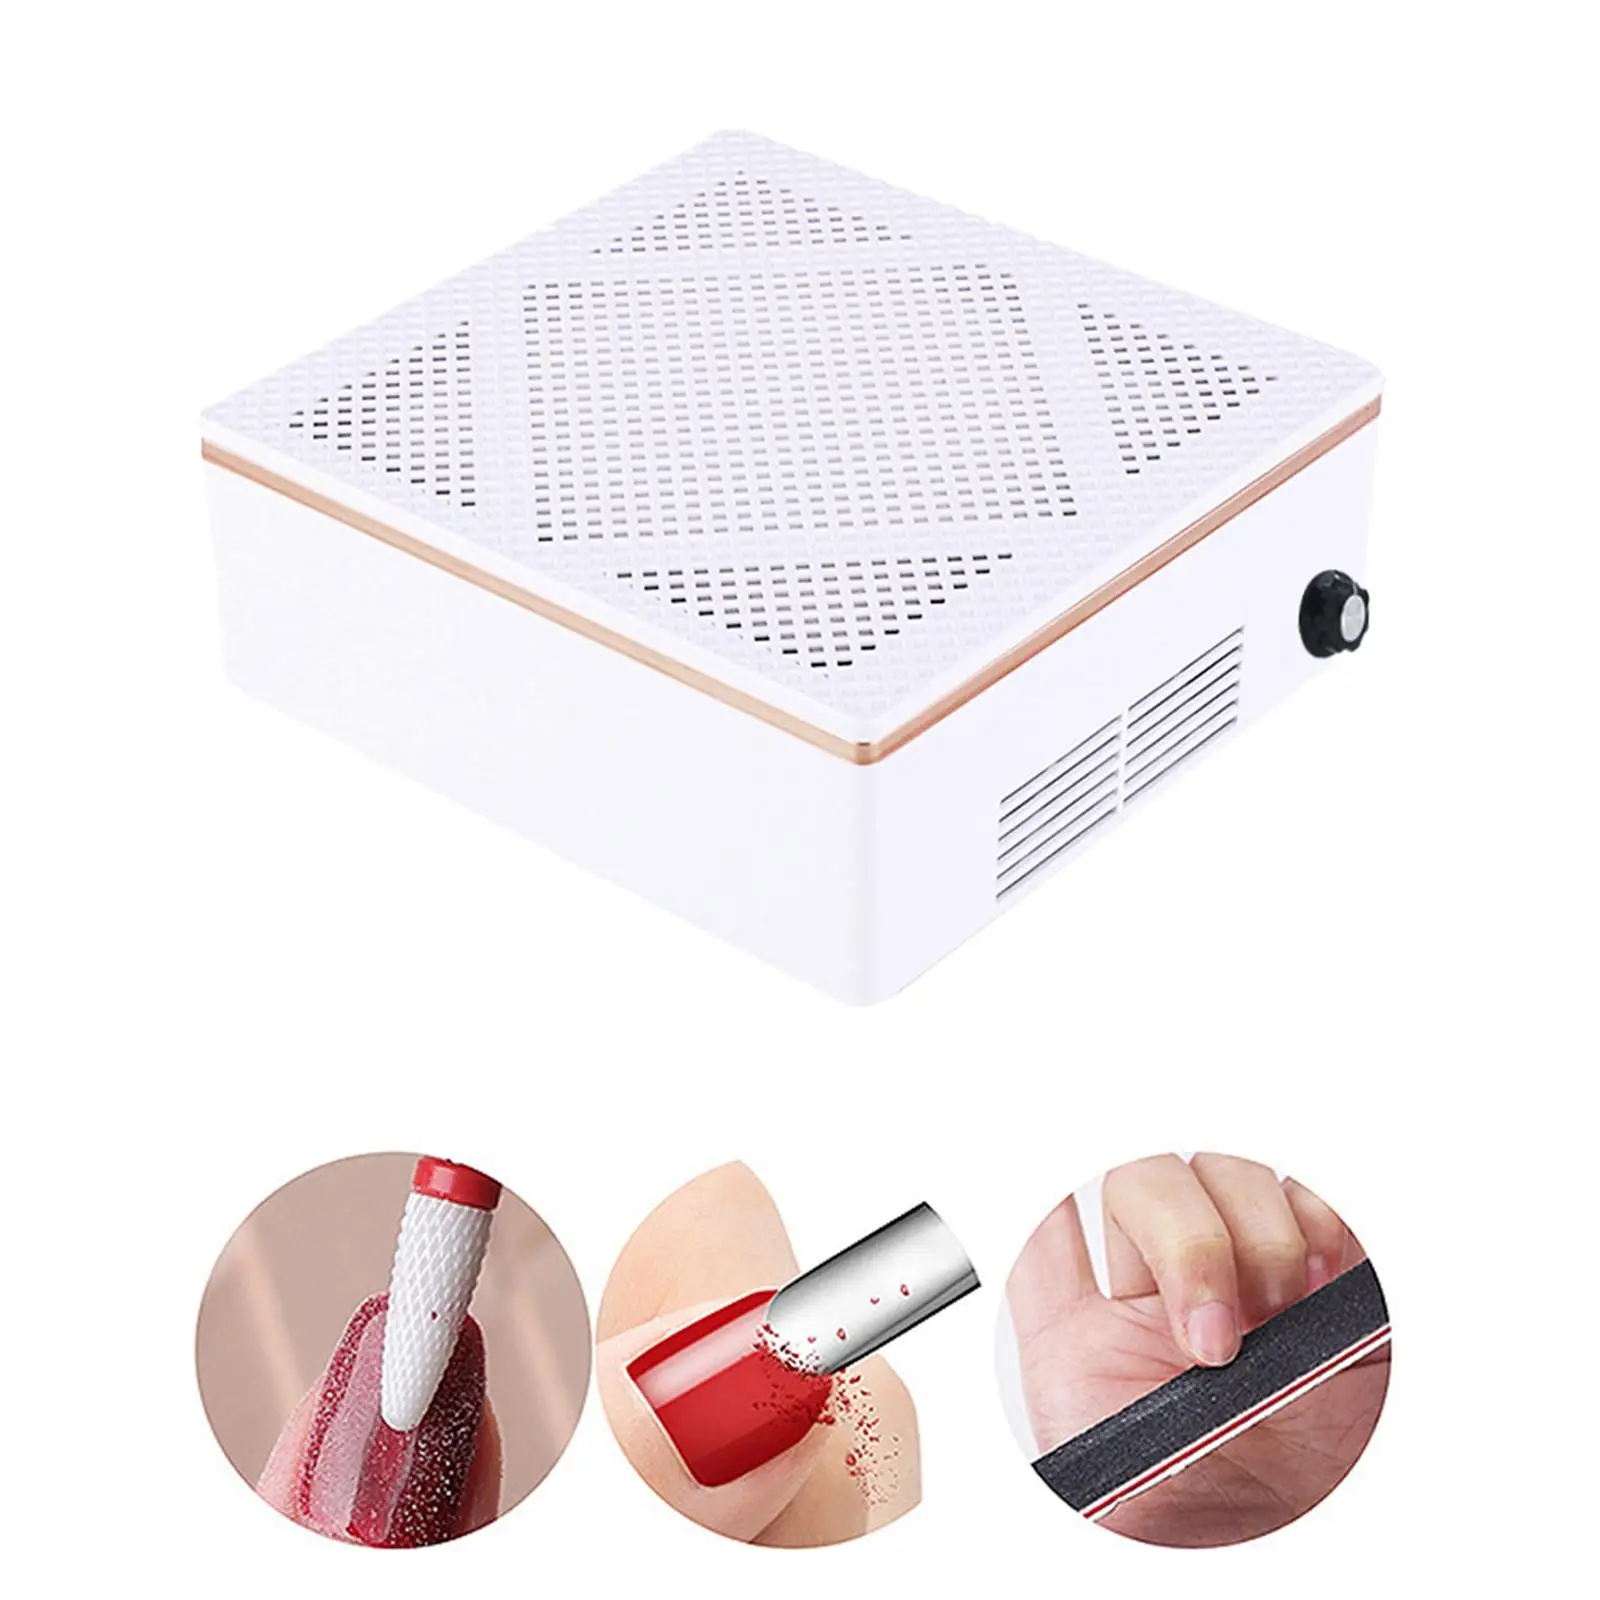 60W Nail Vacuum Dust Collector, Nail Dust Suction Powerful Filter Reusable Nail Art Machine Cleaner, US Adapter